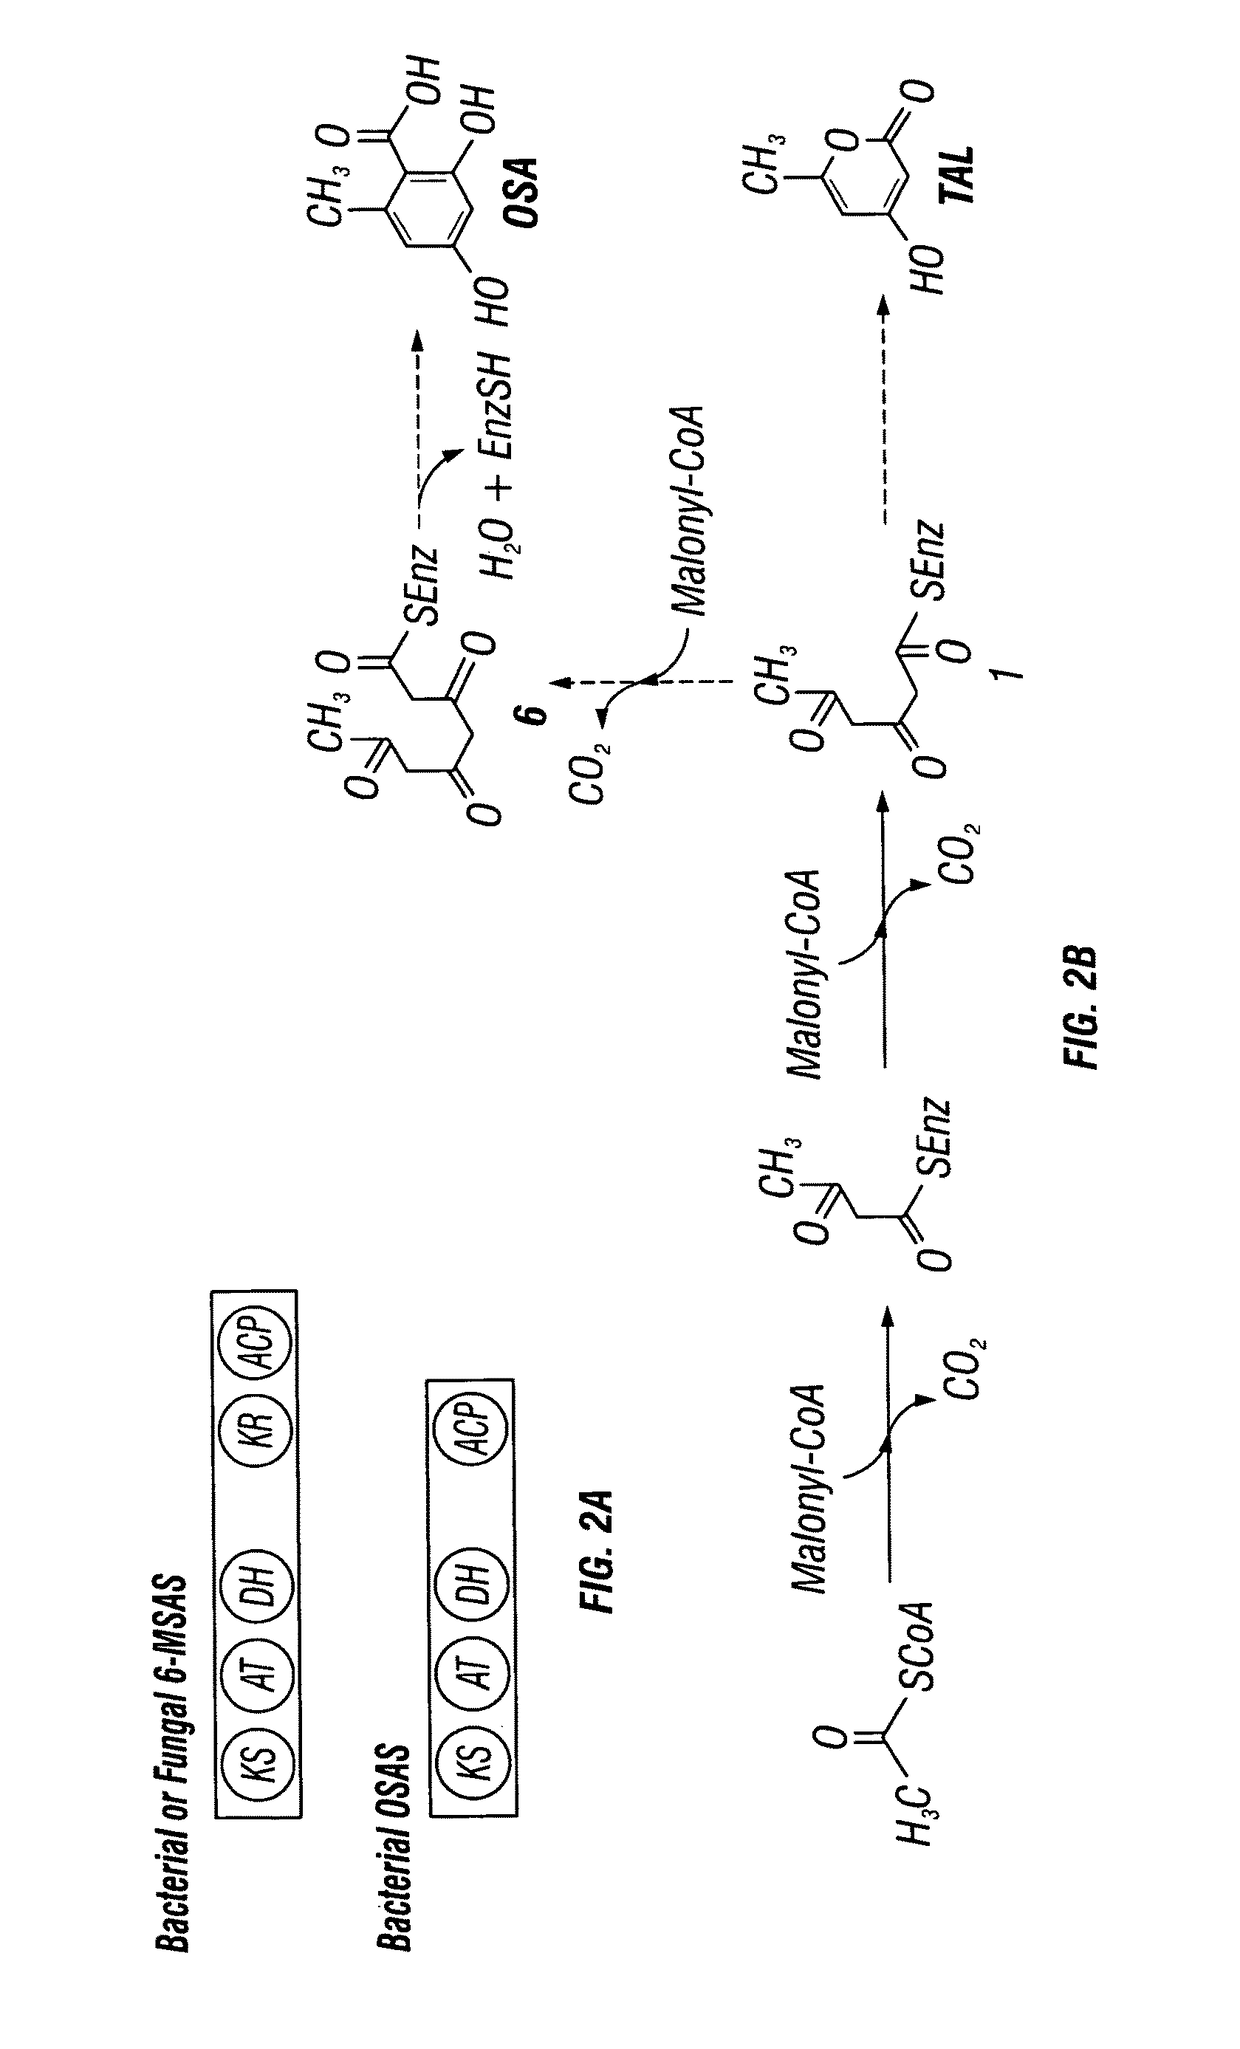 Recombinant production systems for aromatic molecules